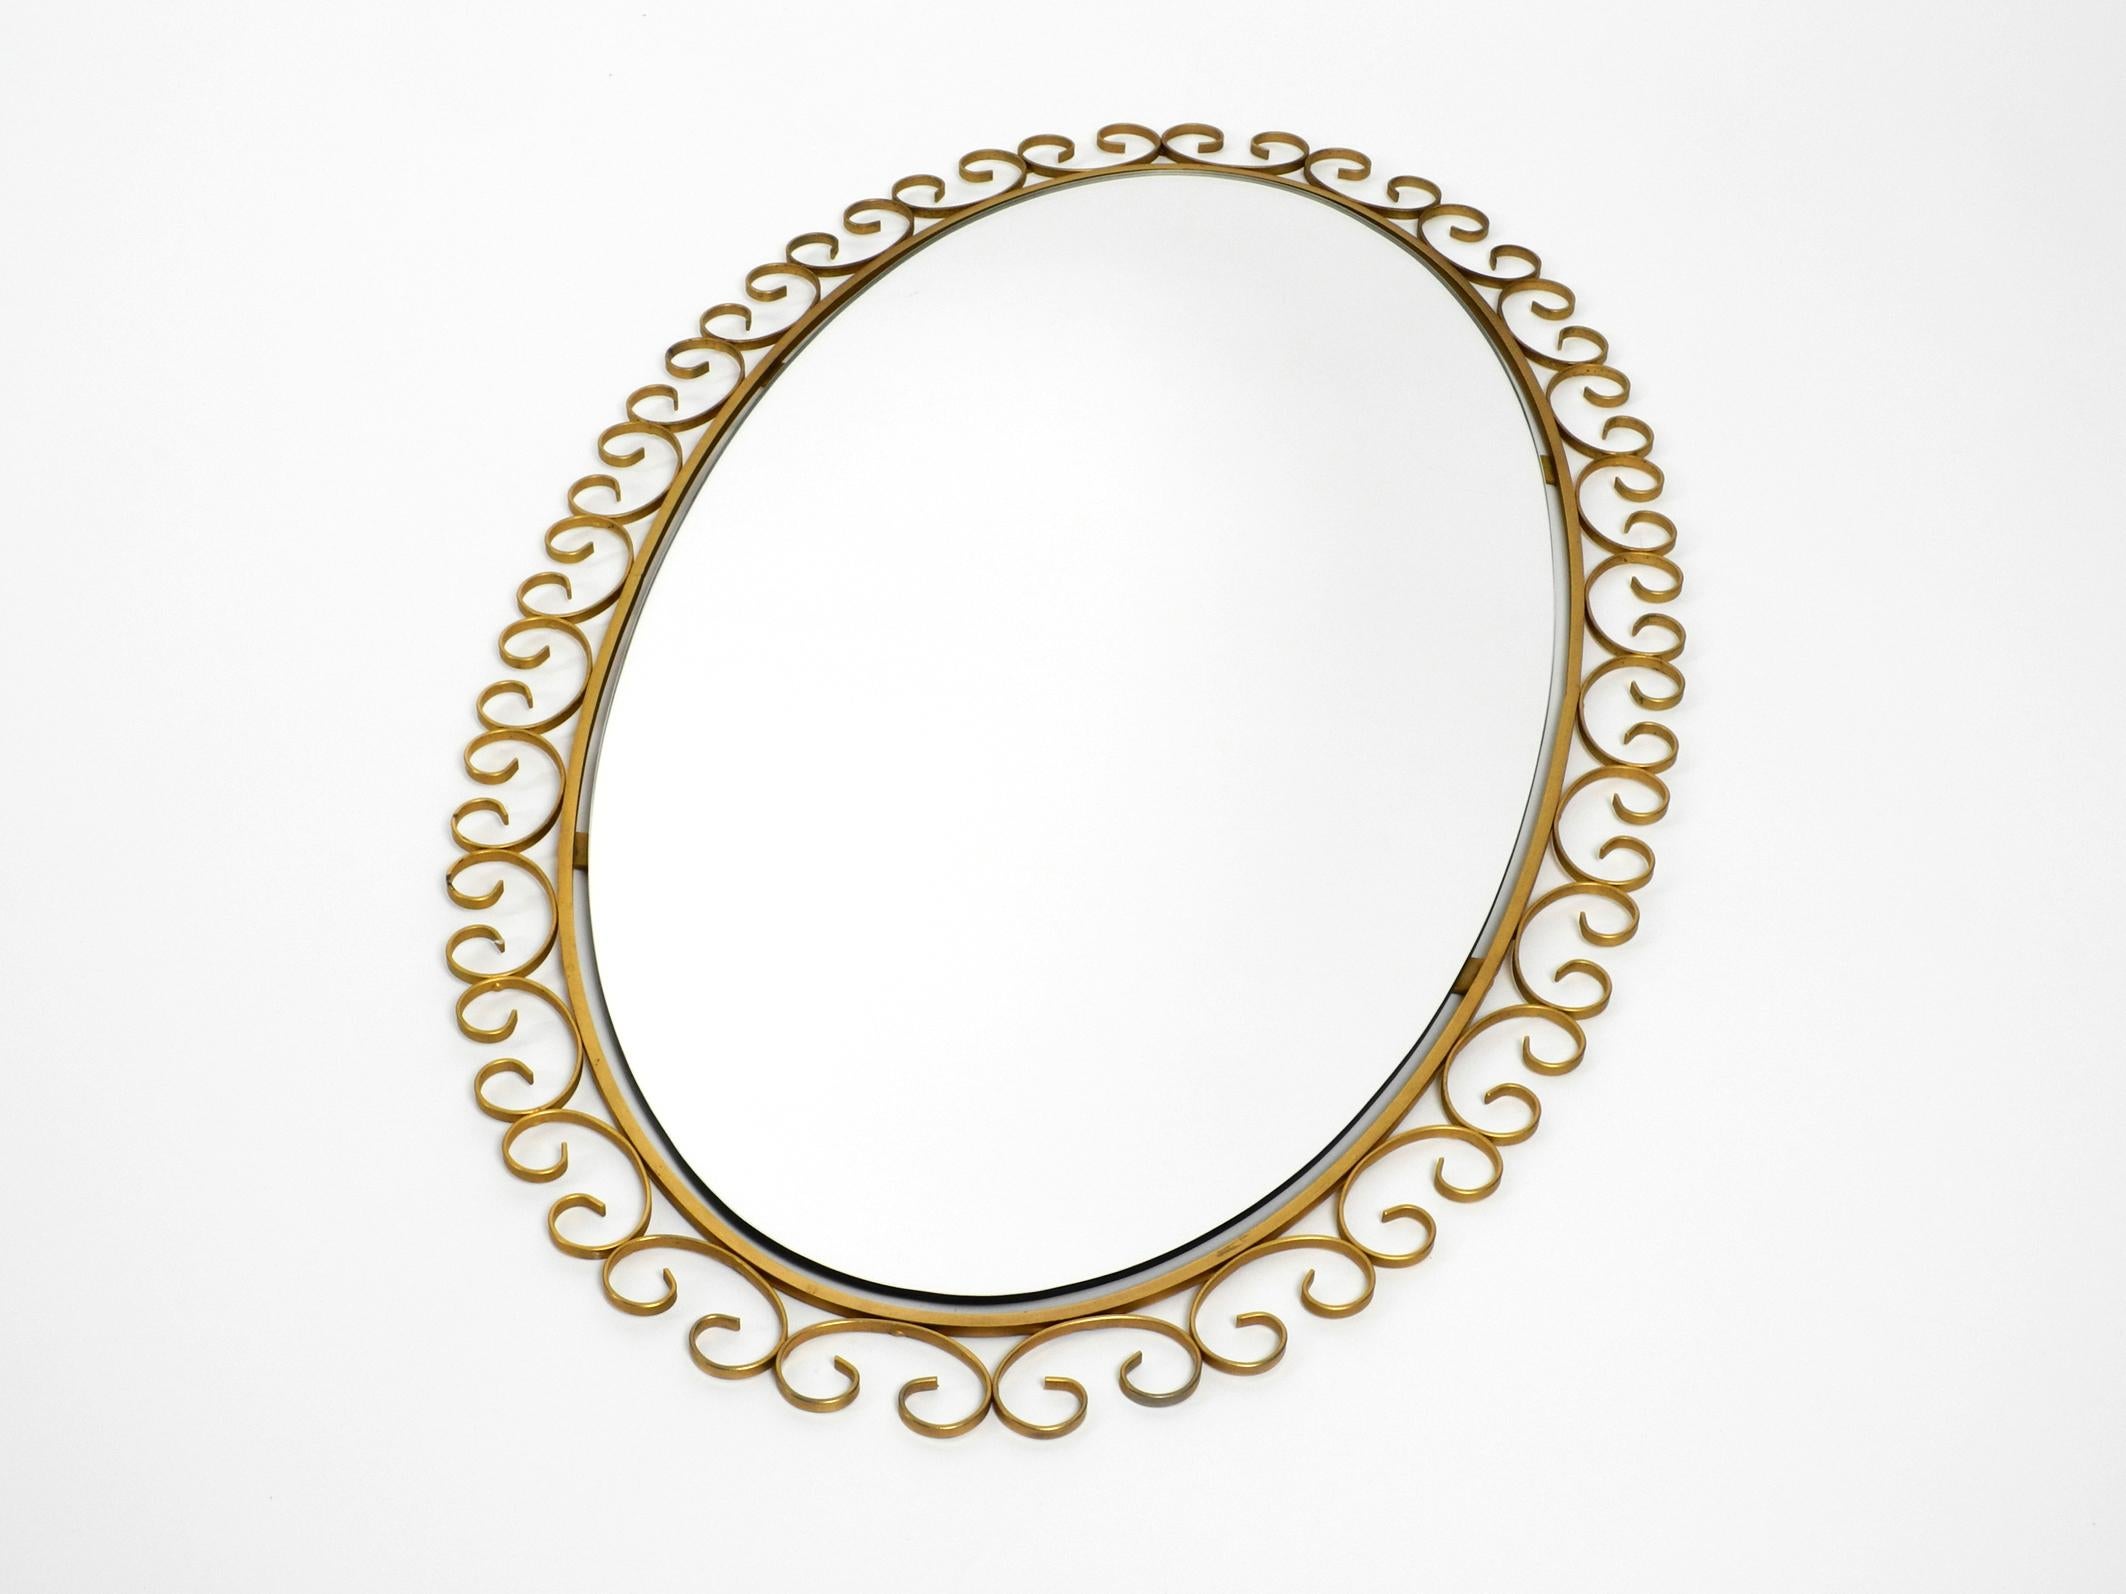 Mid-Century Modern Rare 1960s Large Oval Sunburst Wall Mirror Made of Metal in Brass Anodized